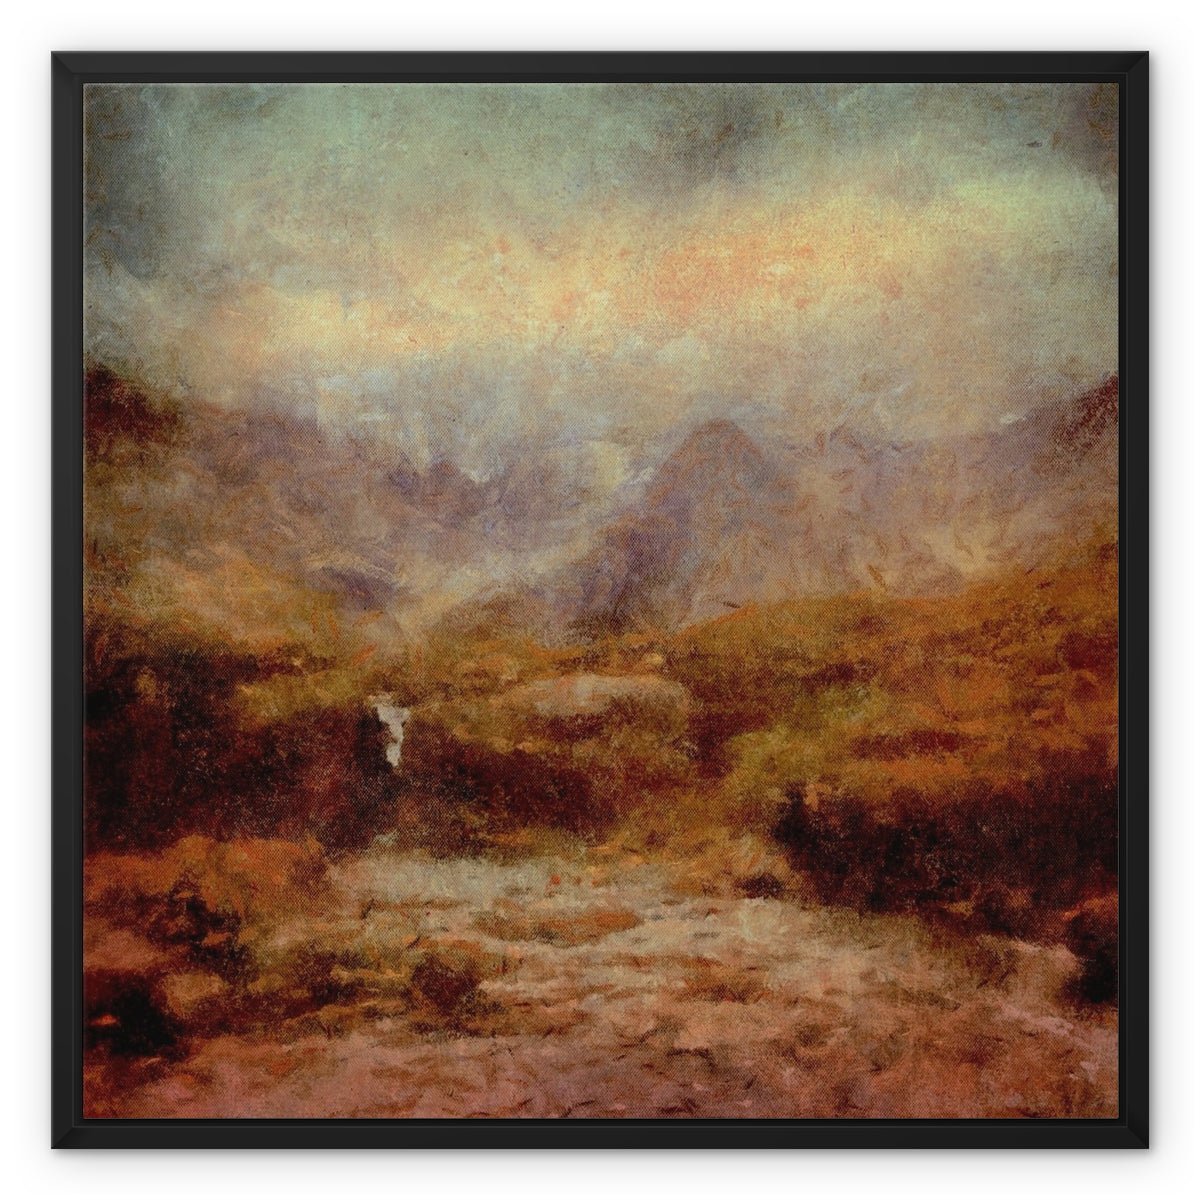 The Brooding Fairy Pools Skye Painting | Framed Canvas From Scotland-Floating Framed Canvas Prints-Skye Art Gallery-24"x24"-Black Frame-Paintings, Prints, Homeware, Art Gifts From Scotland By Scottish Artist Kevin Hunter